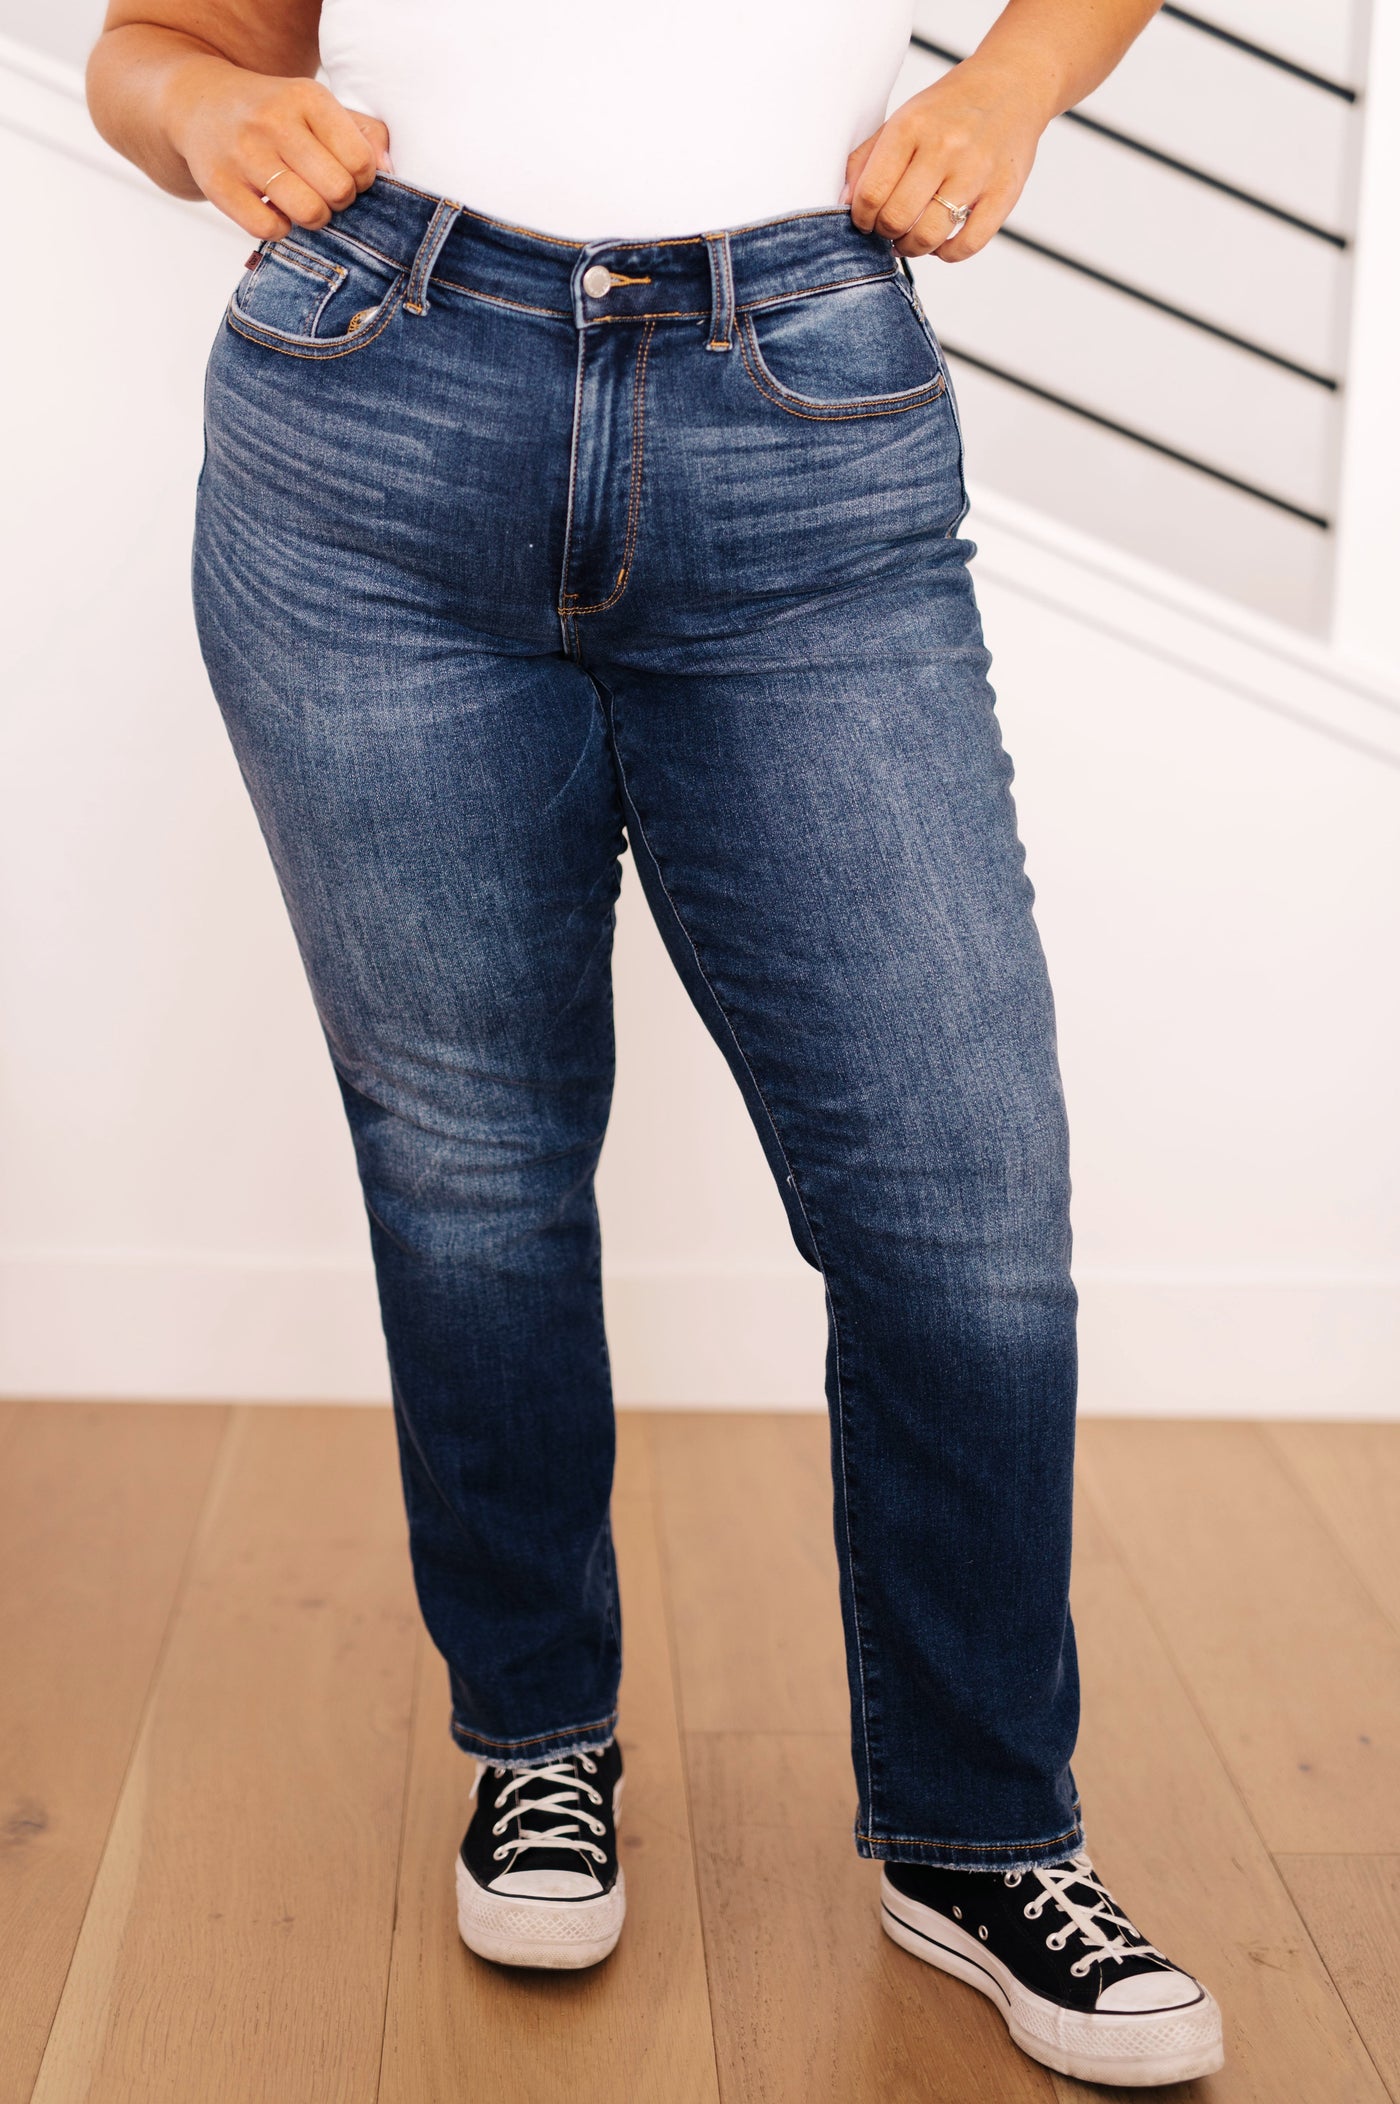 Stay warm year-round with Estelle High Waist Thermal Straight Jeans fro Judy Blue.